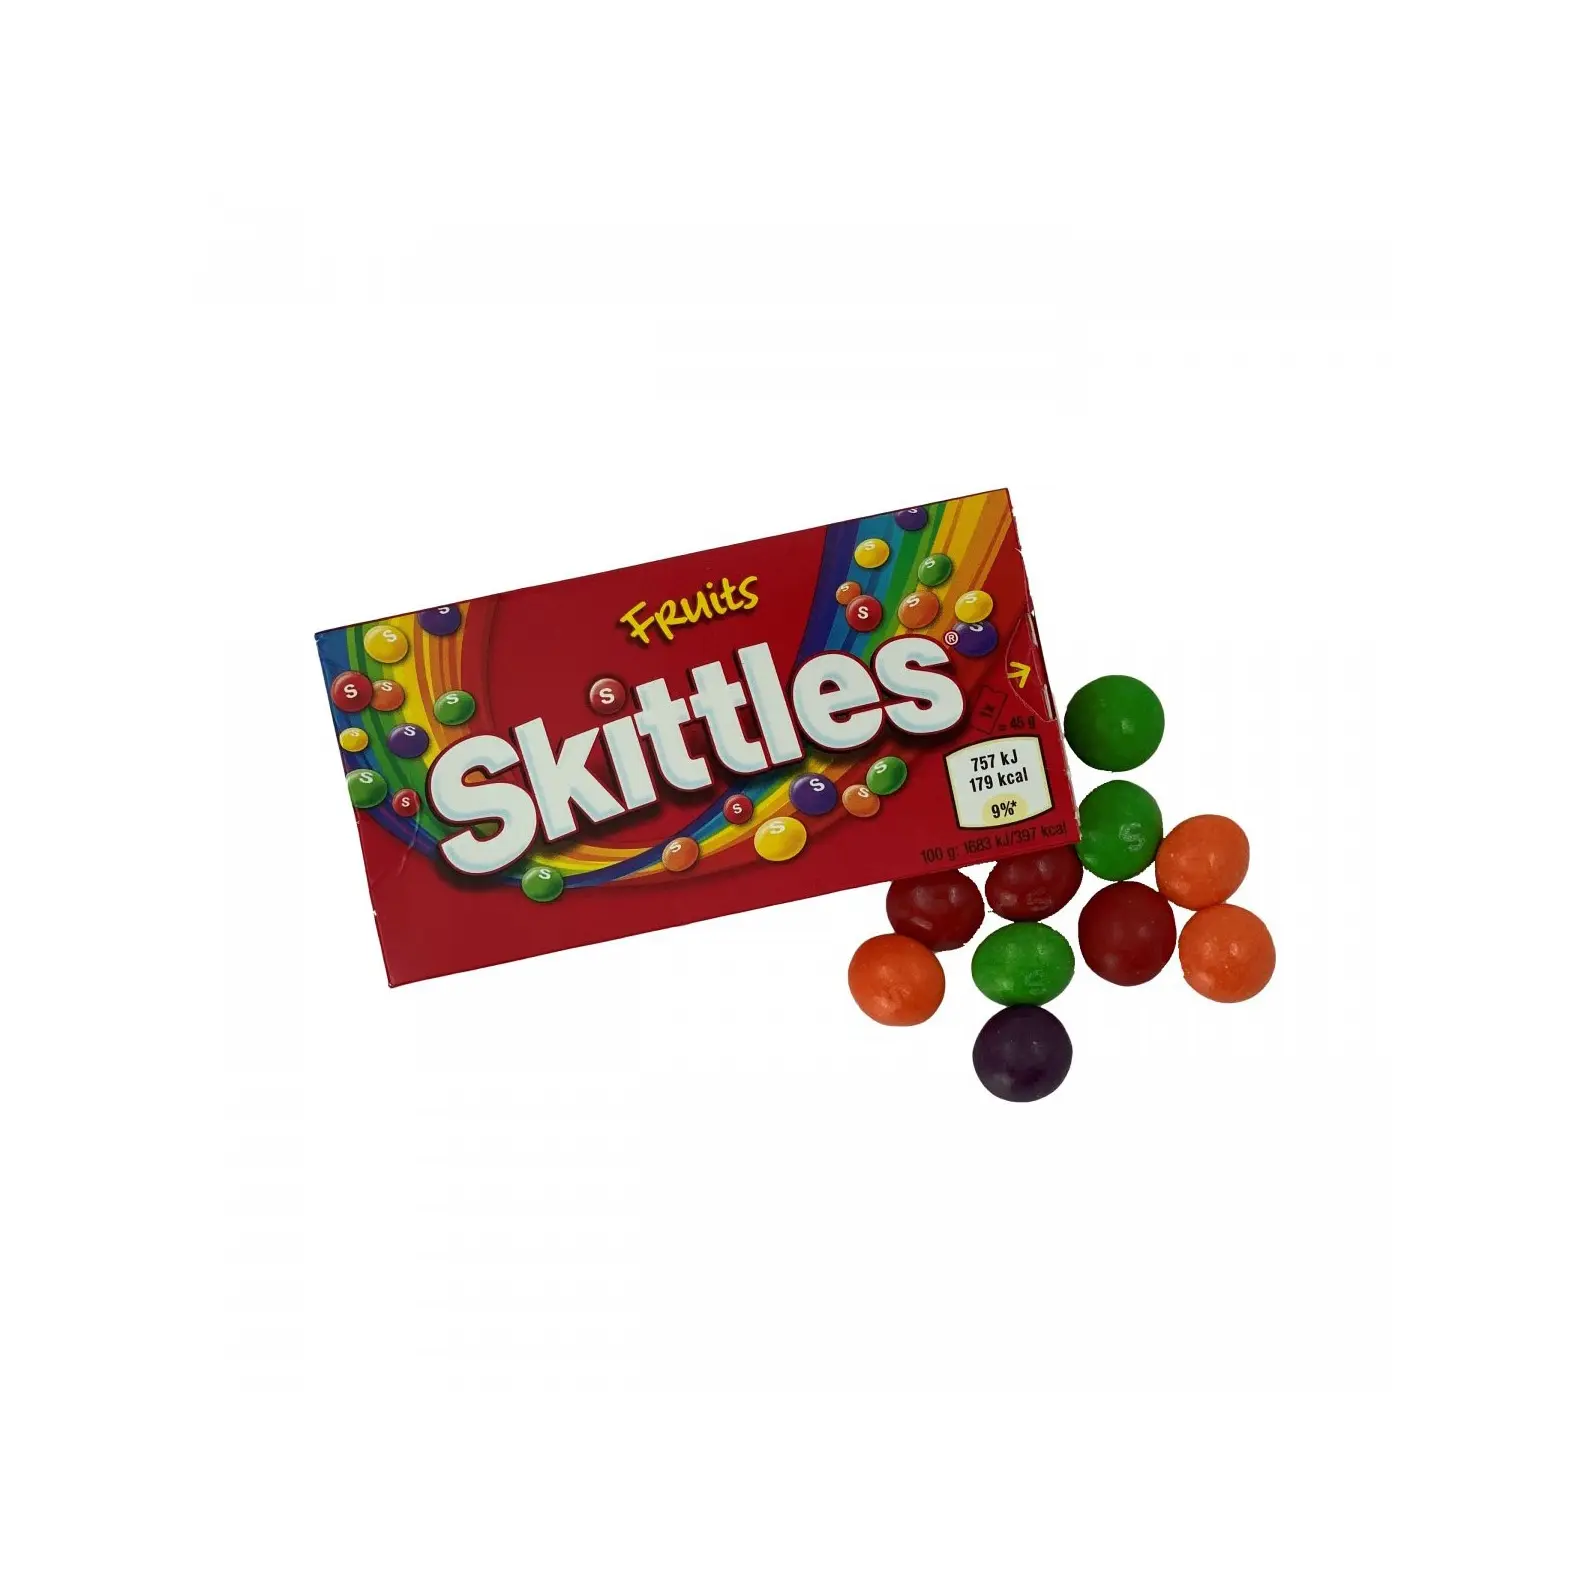 Sour Skittles Bite Size Chewy Candy (Pack of 12) 2x Skittles Fruits Giants Crazy Sours Brand New 125g (3x Bigger)